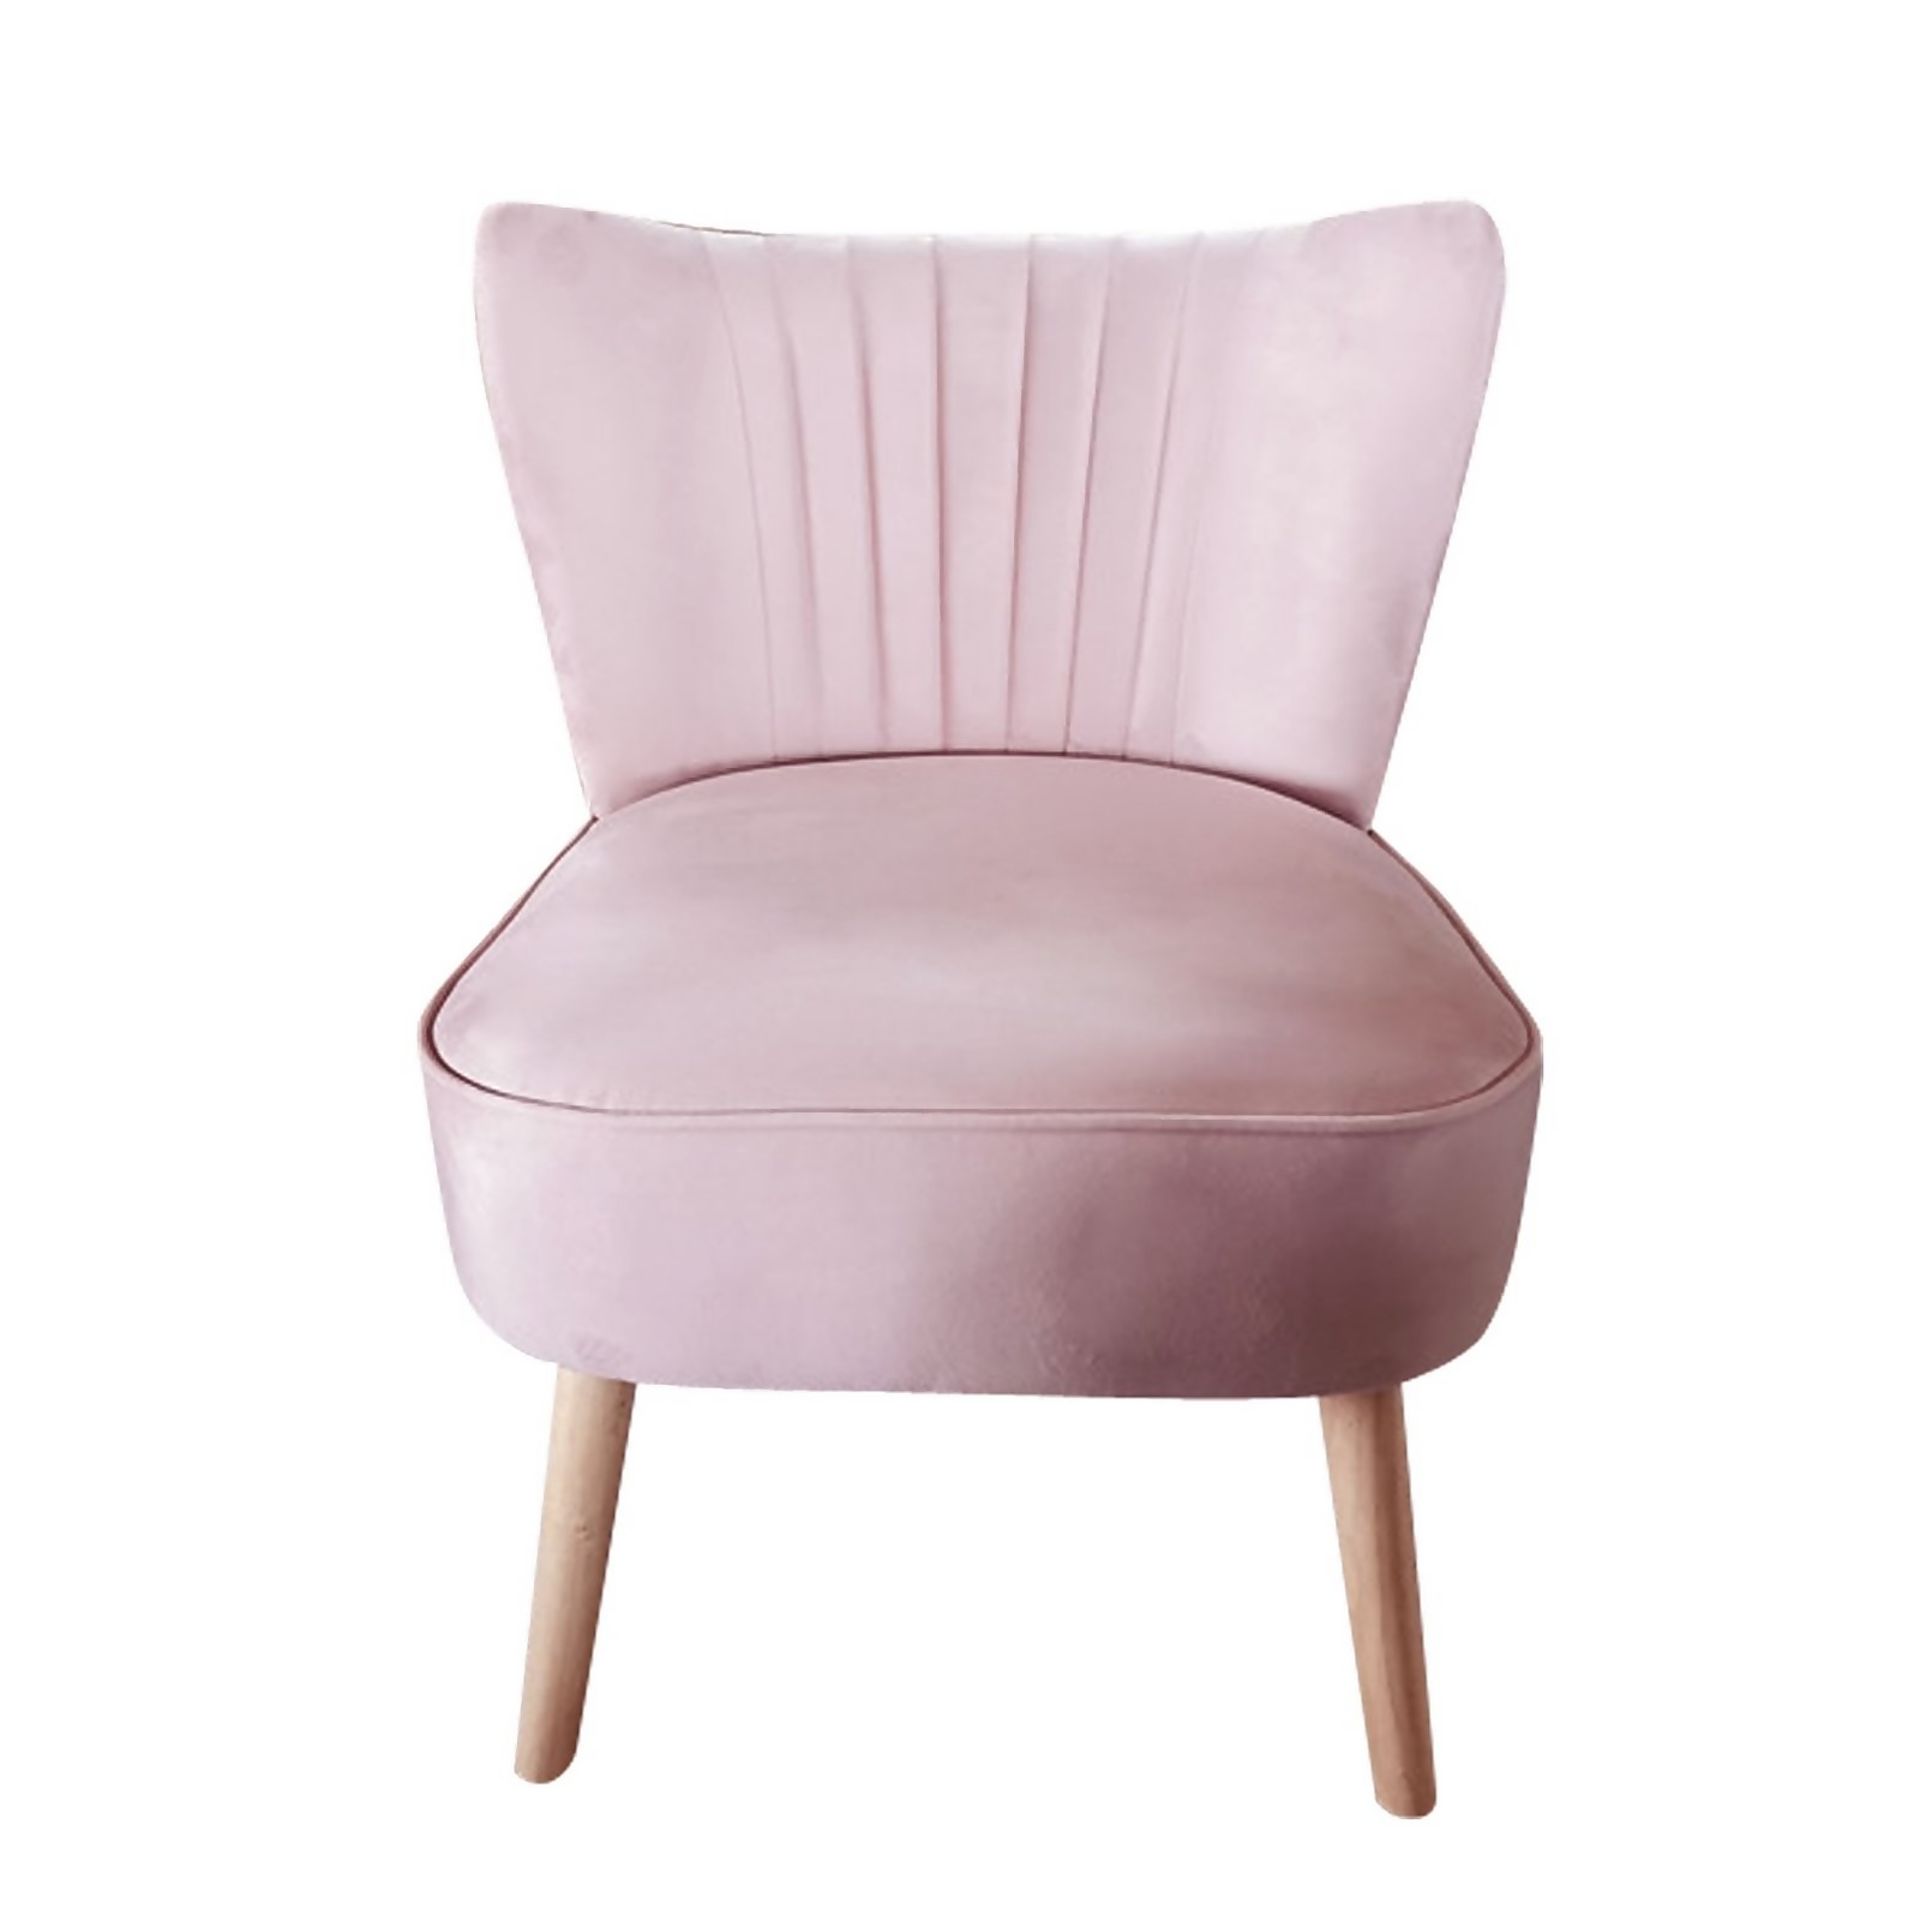 (R3P) 1 X Sophia Occasional Chair Blush. Velvet Fabric Cover With Metal Legs. (H77xW64xD71cm) - Image 4 of 6